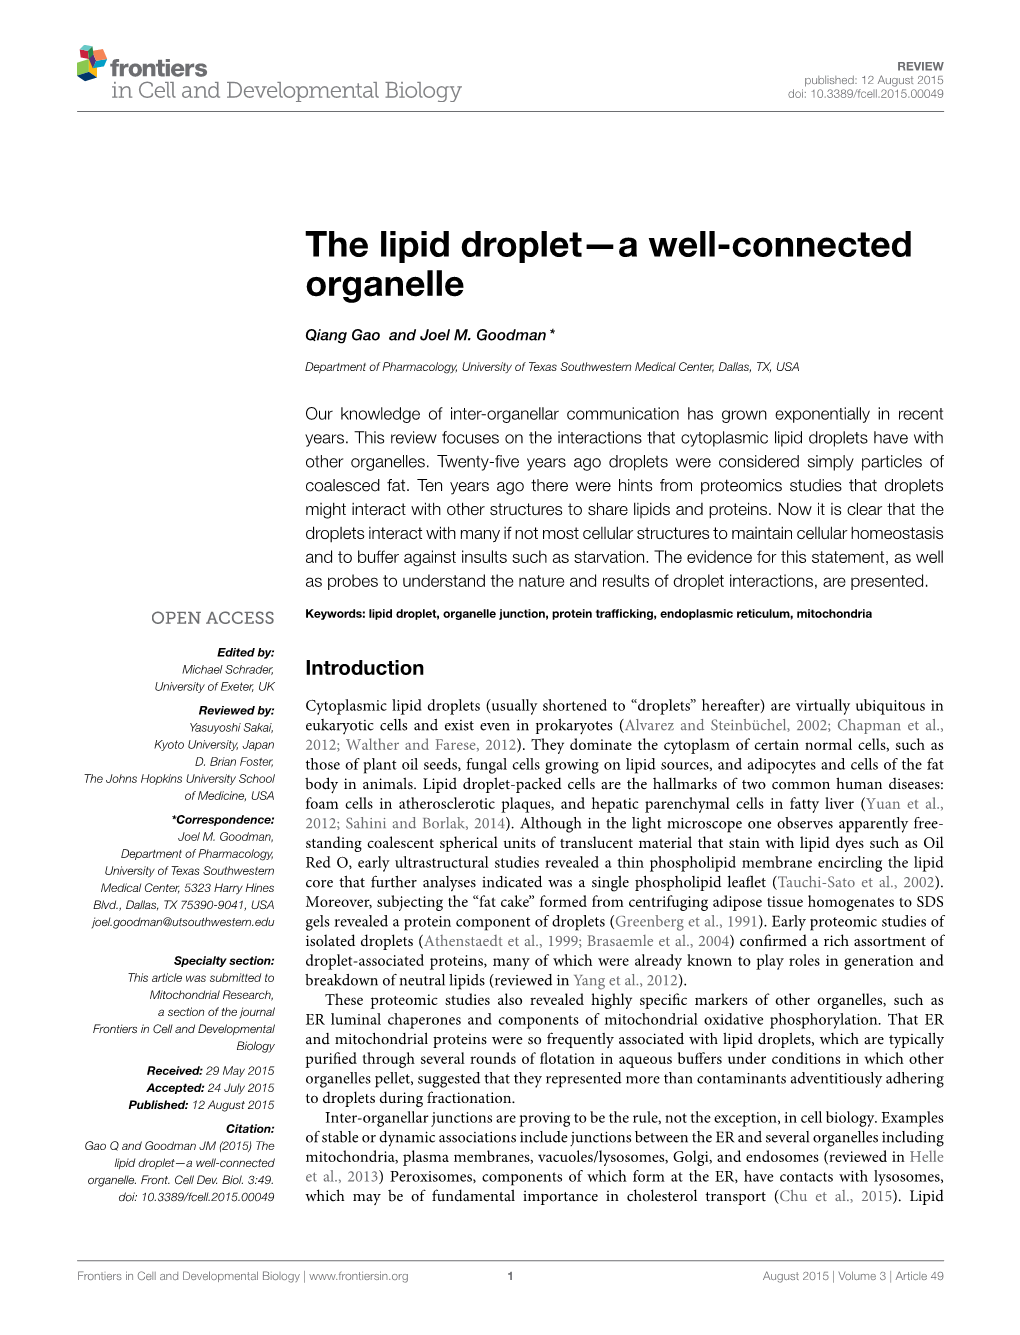 The Lipid Droplet—A Well-Connected Organelle